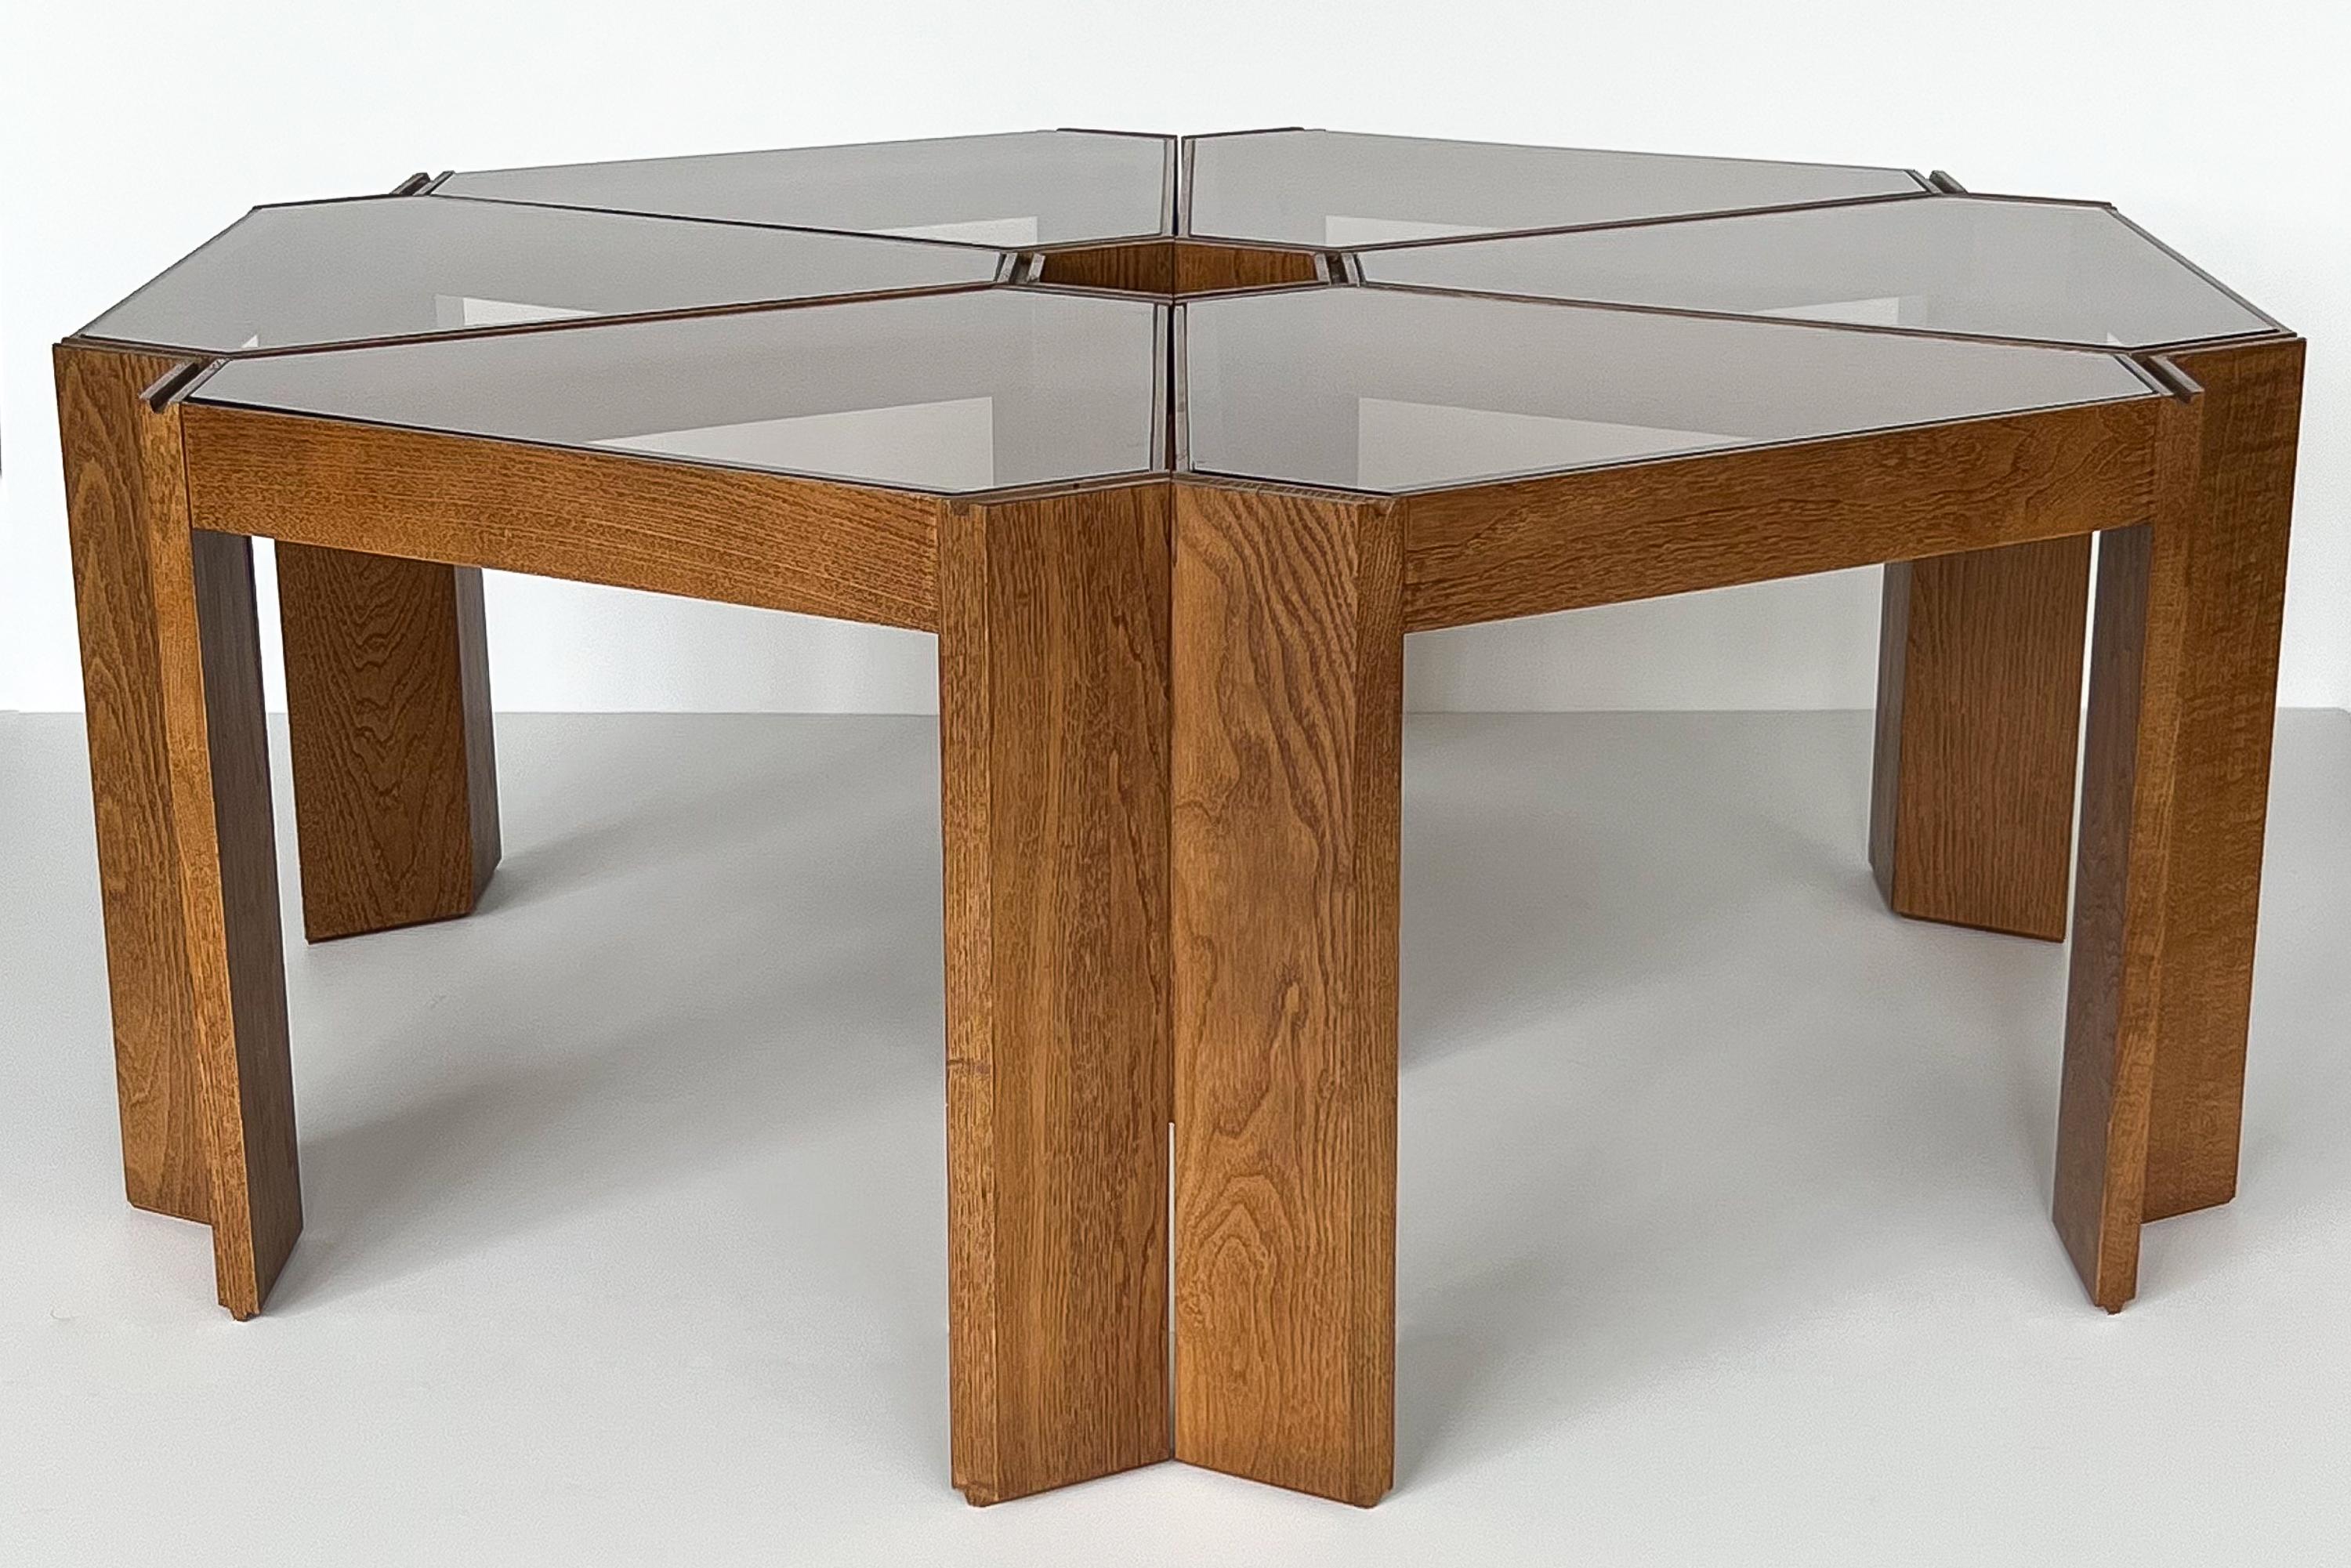 Set of six Italian bunching multi functional modular tables in the style of Frattini, Italy circa 1970s. This set of tables is perfect as a modular coffee table. Six triangular pie shaped individual side tables can be placed together in various